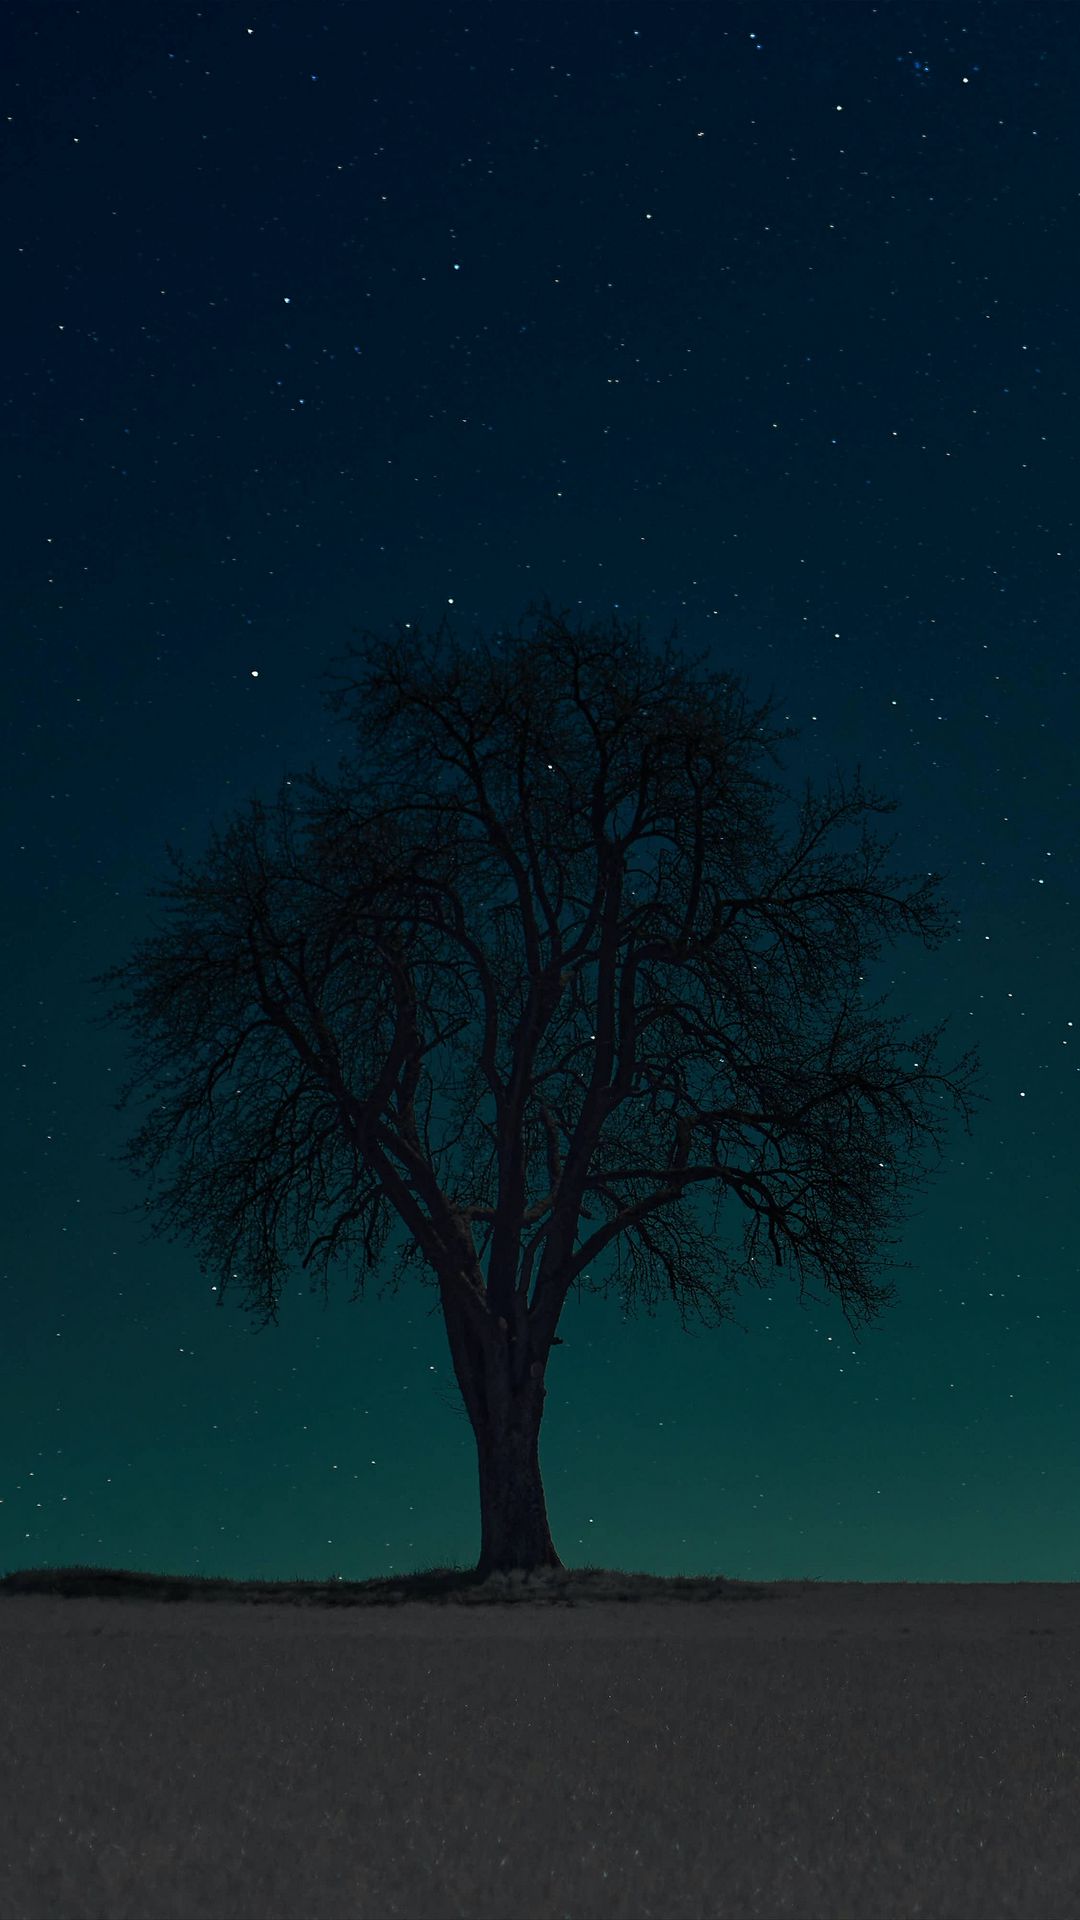 Alone Tree Silhouette At Night Wallpaper